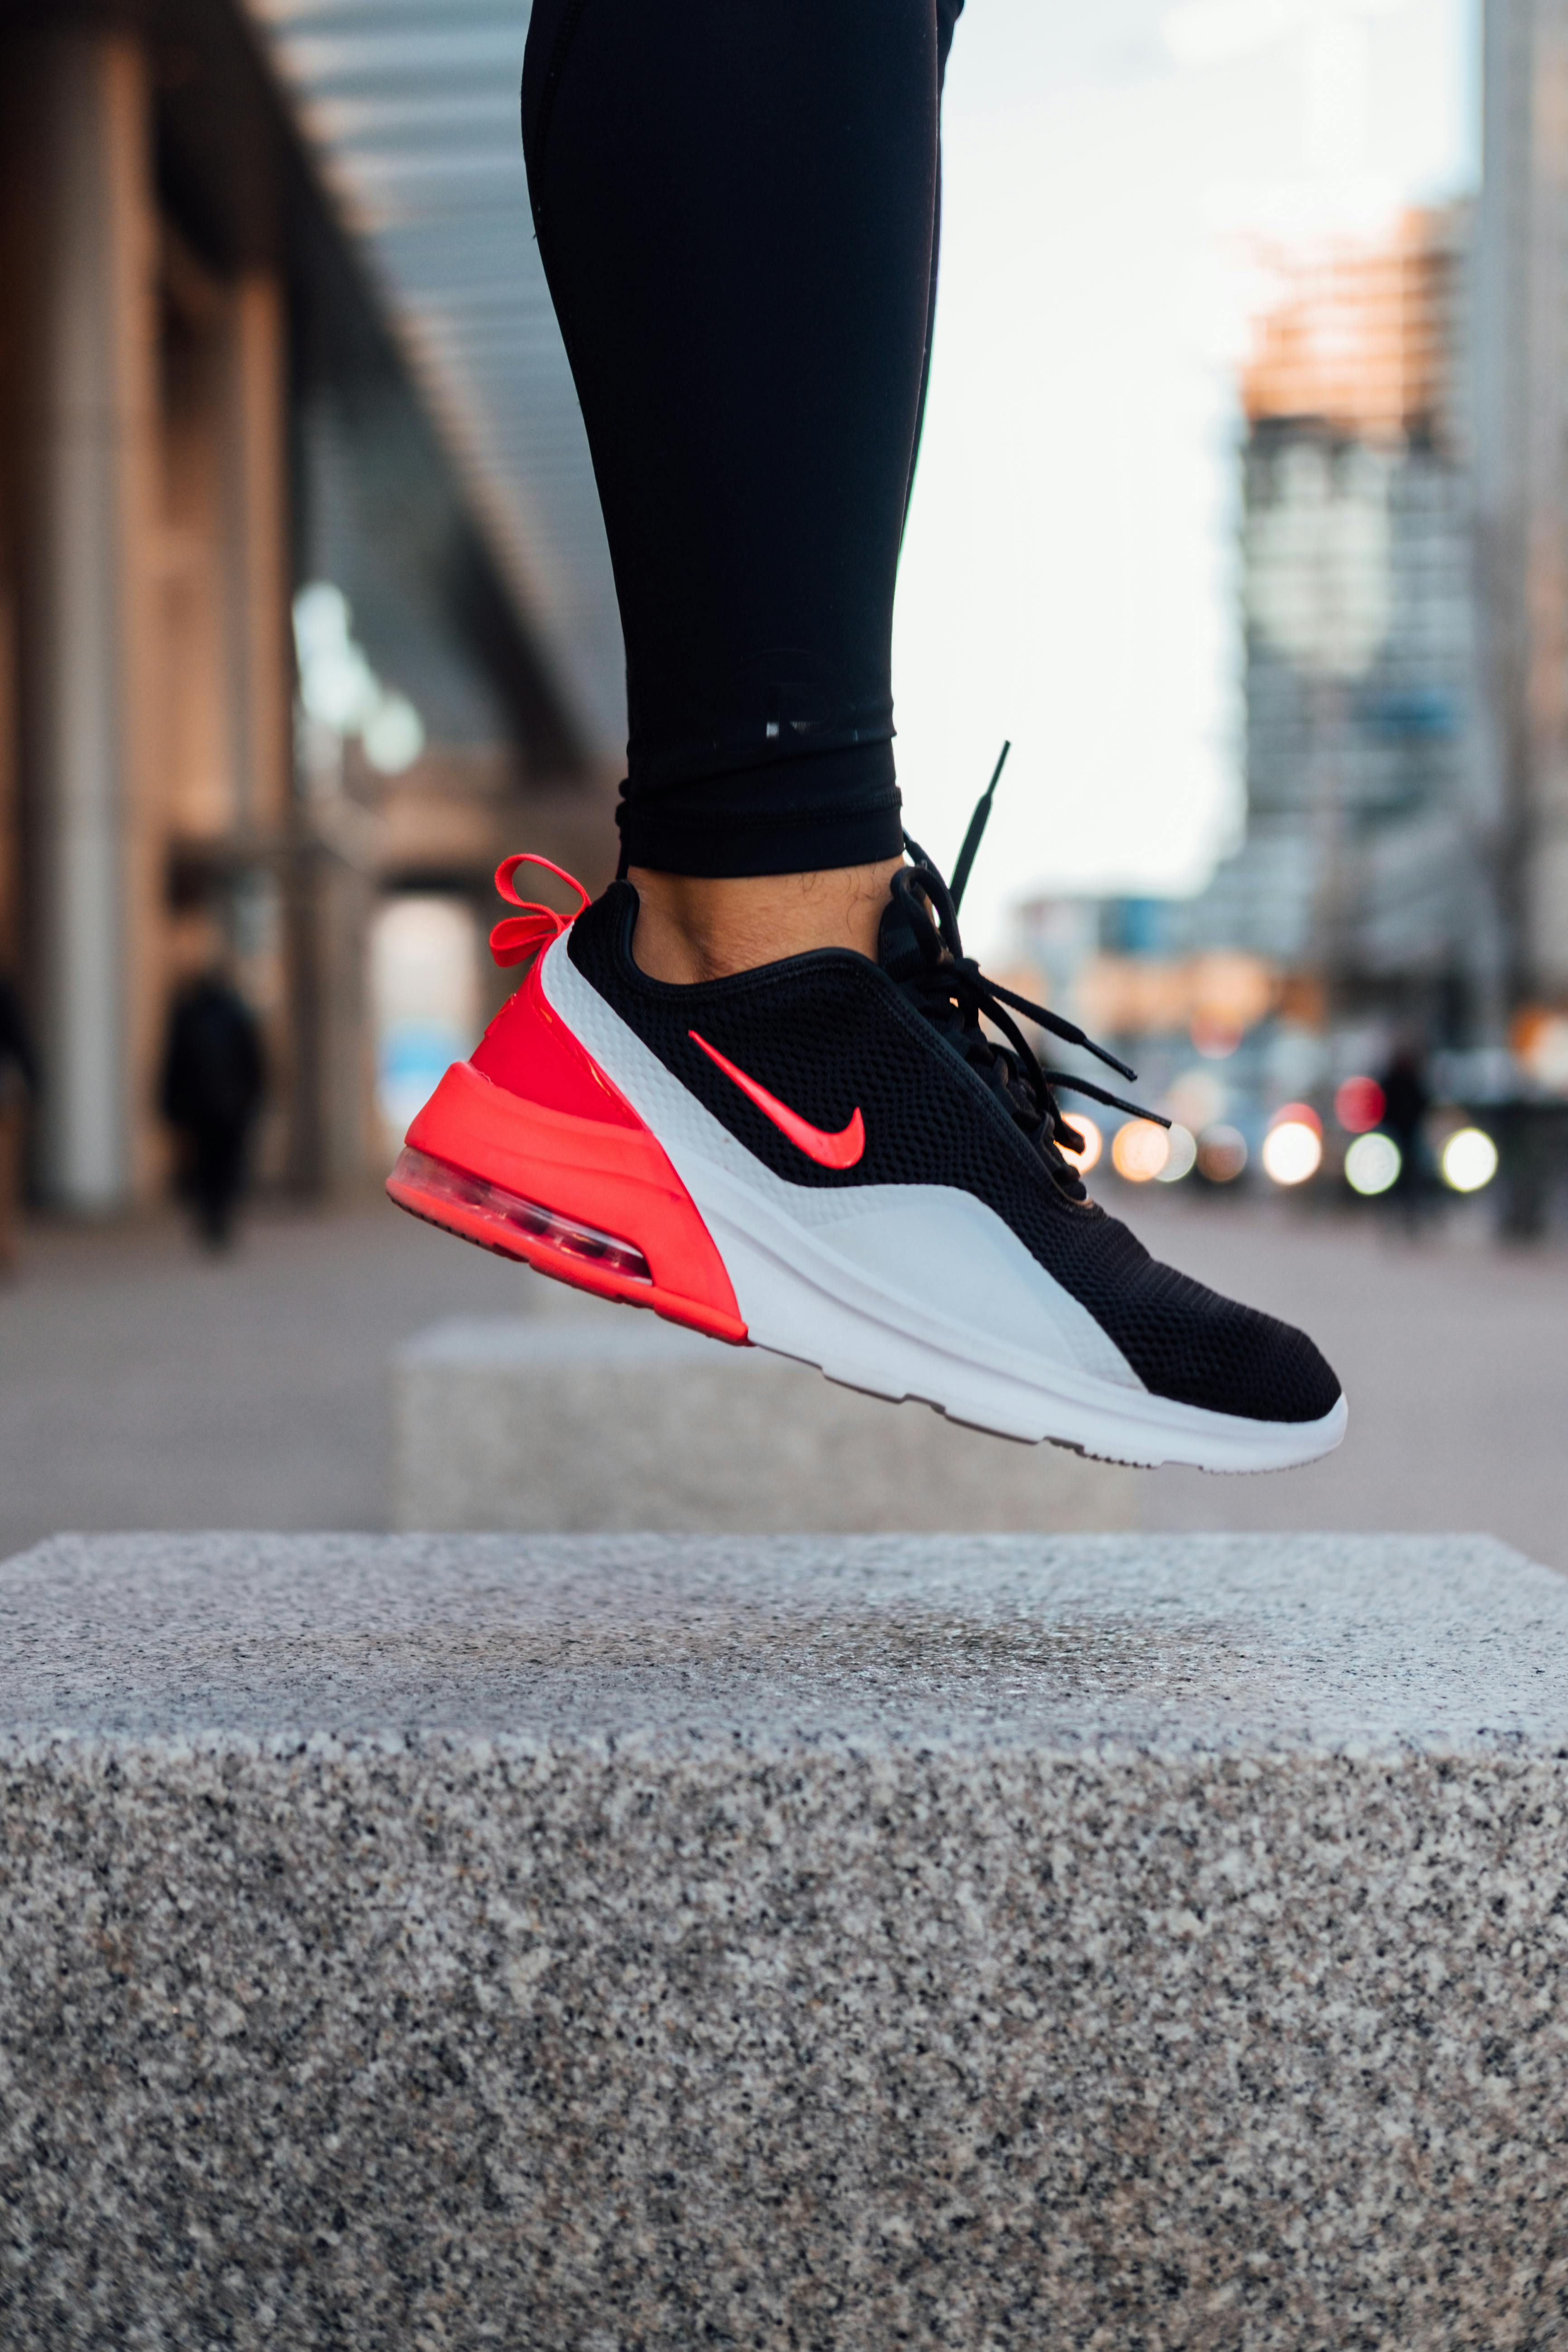 Nike Shoes Photos, Download The BEST Free Nike Shoes Stock Photos & HD  Images